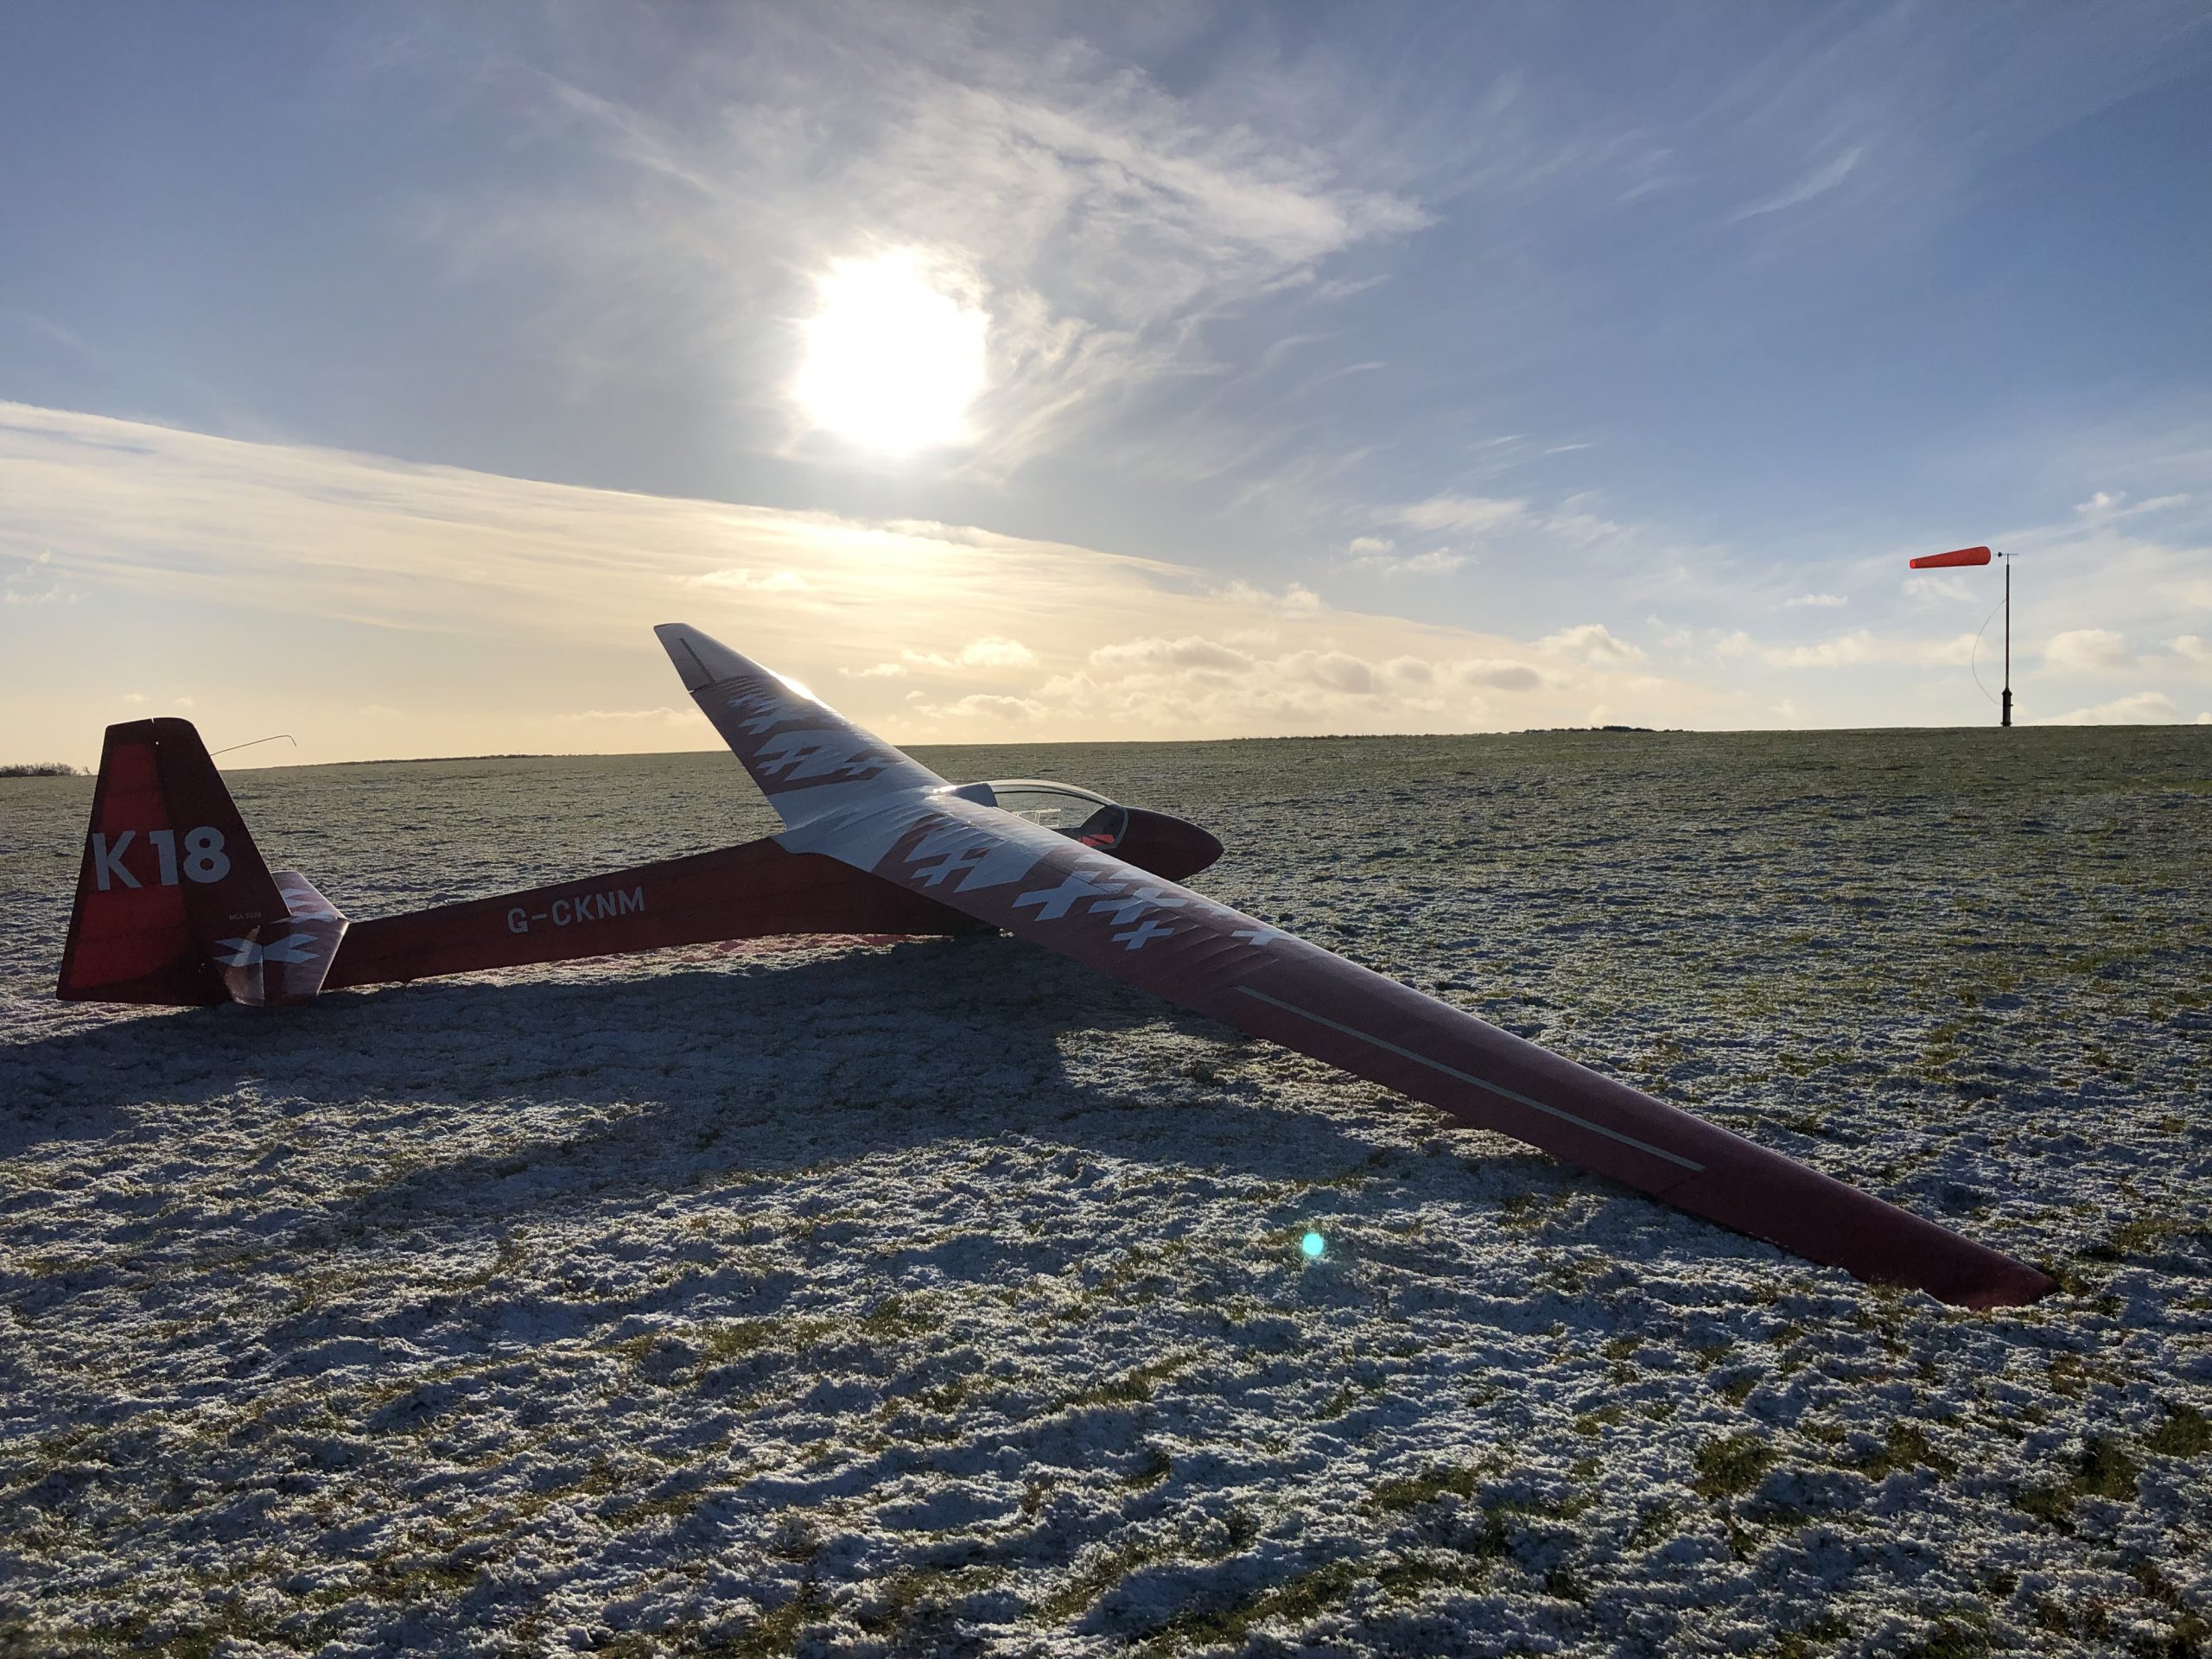 K18 KNM on a frosty airfield at sunset